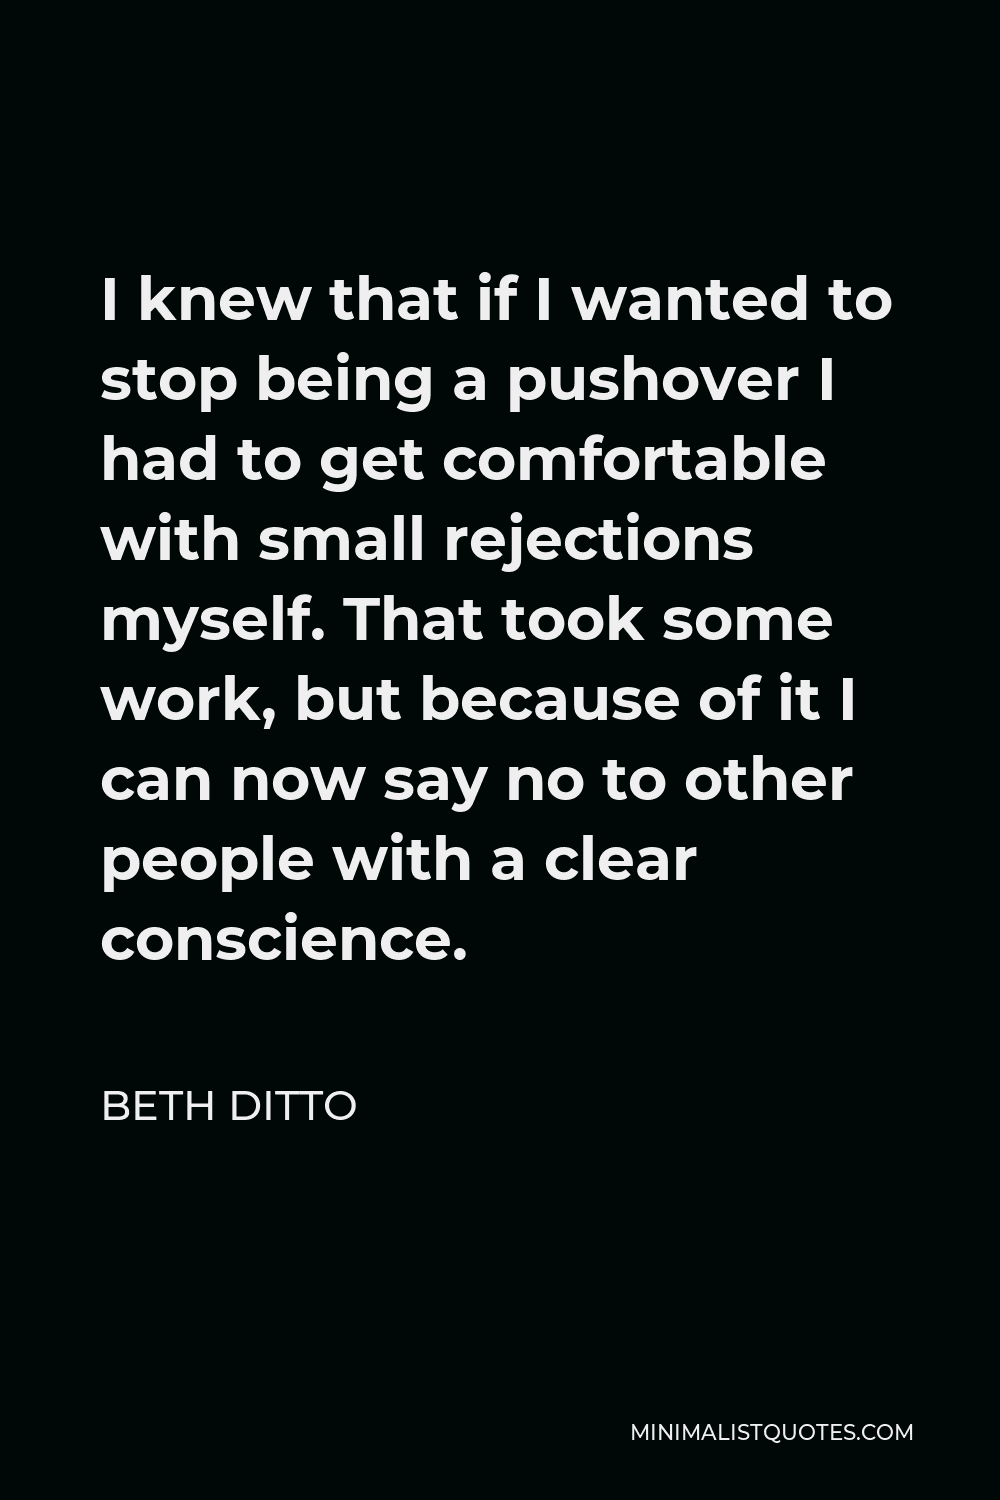 Beth Ditto Quote - I knew that if I wanted to stop being a pushover I had to get comfortable with small rejections myself. That took some work, but because of it I can now say no to other people with a clear conscience.